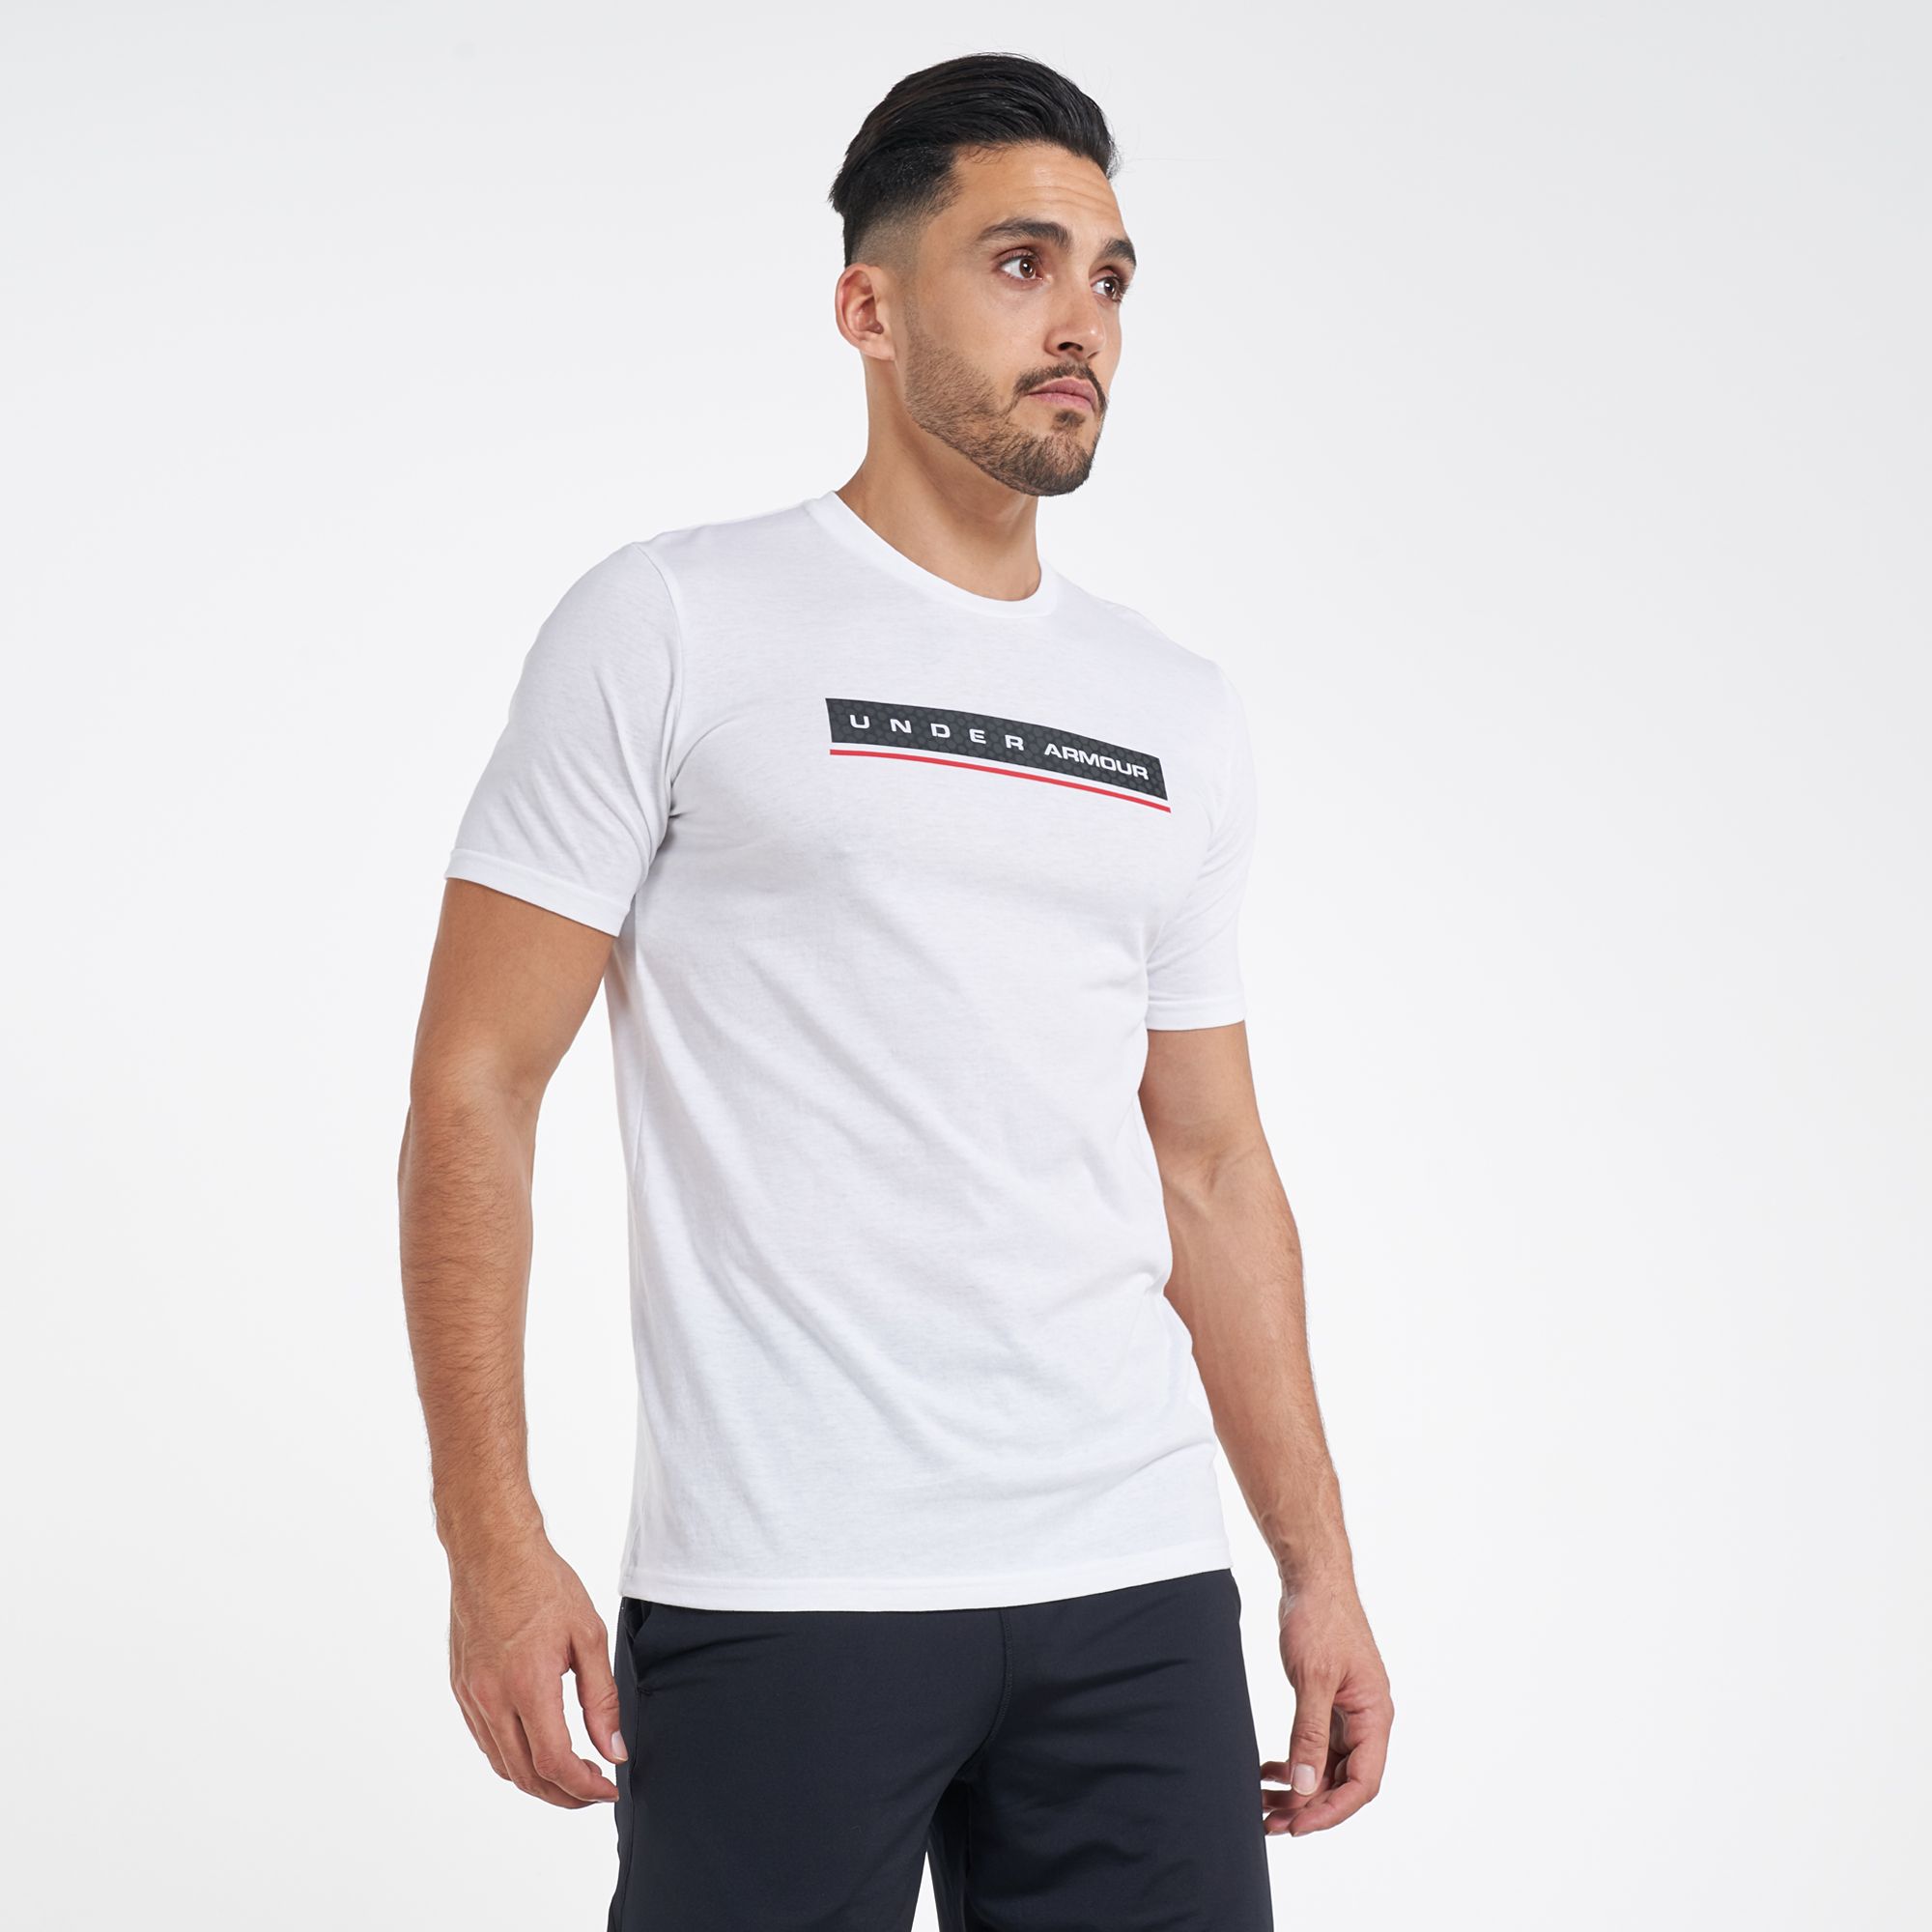 Under Armour Men's Reflection T-Shirt | T-Shirts | Tops | Clothing ...